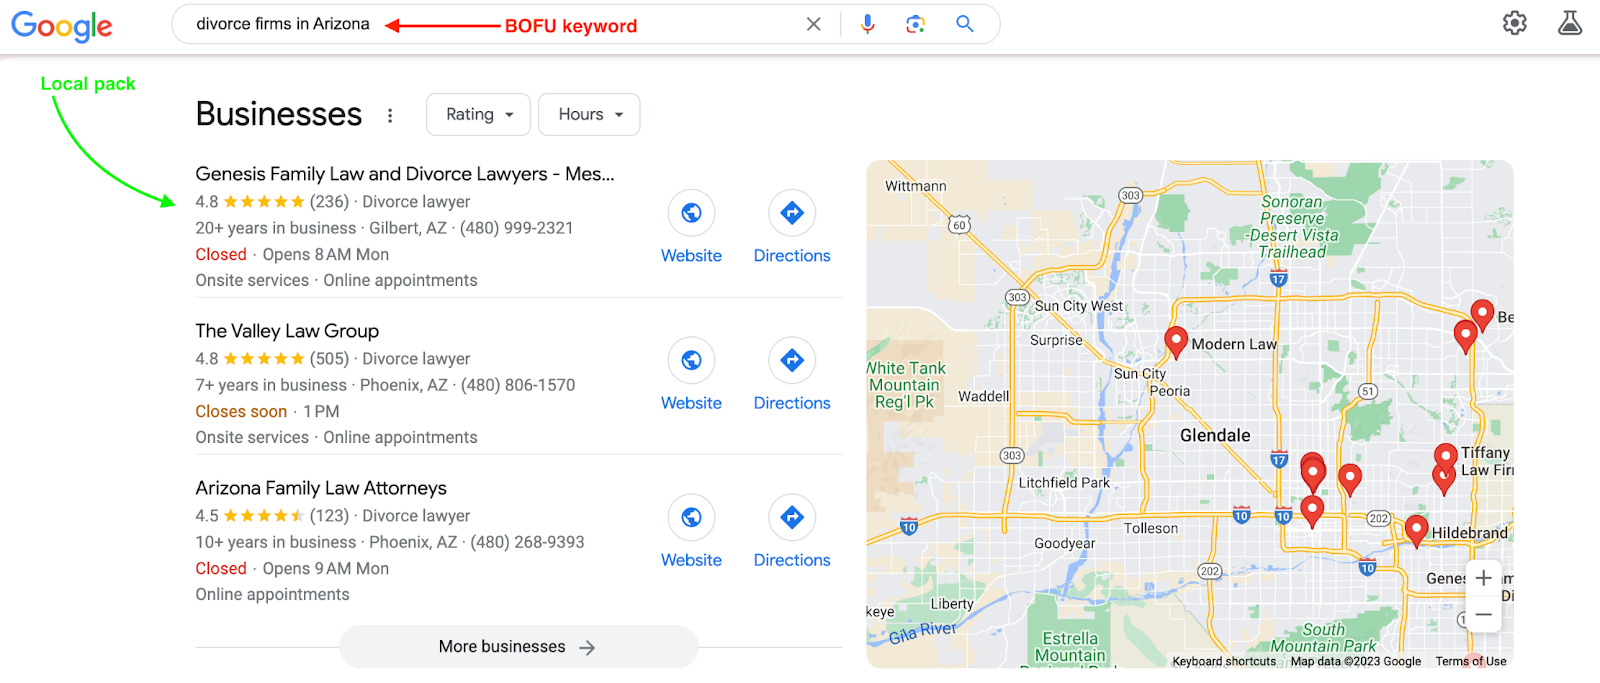 Local pack results for BOFU keyword "divorce firms in Arizona". 